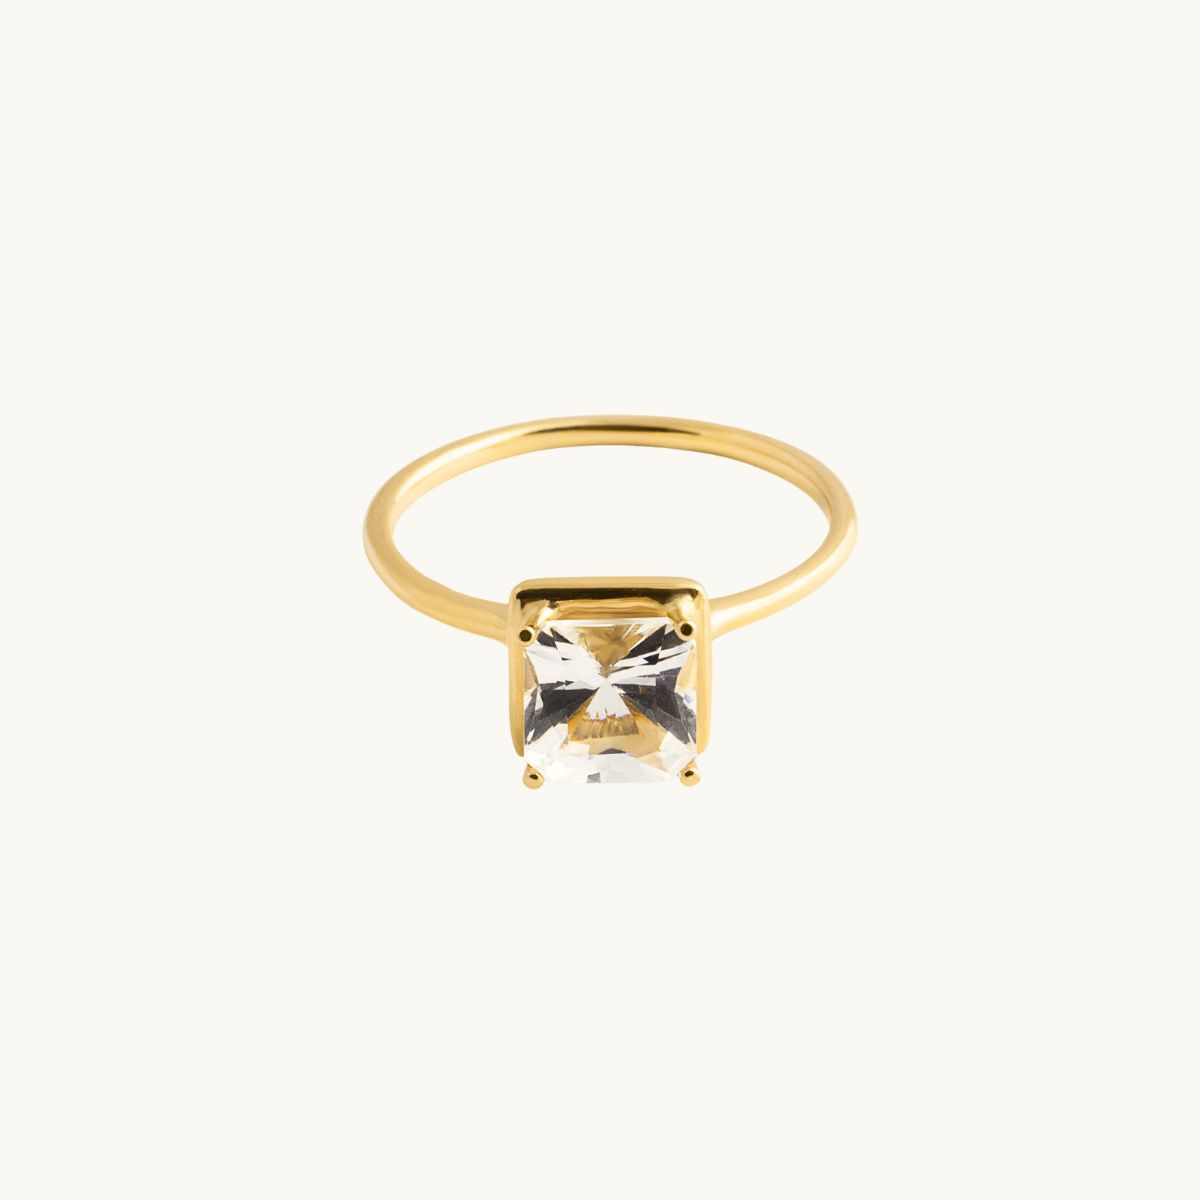 18K gold ring with a square white topaz stone